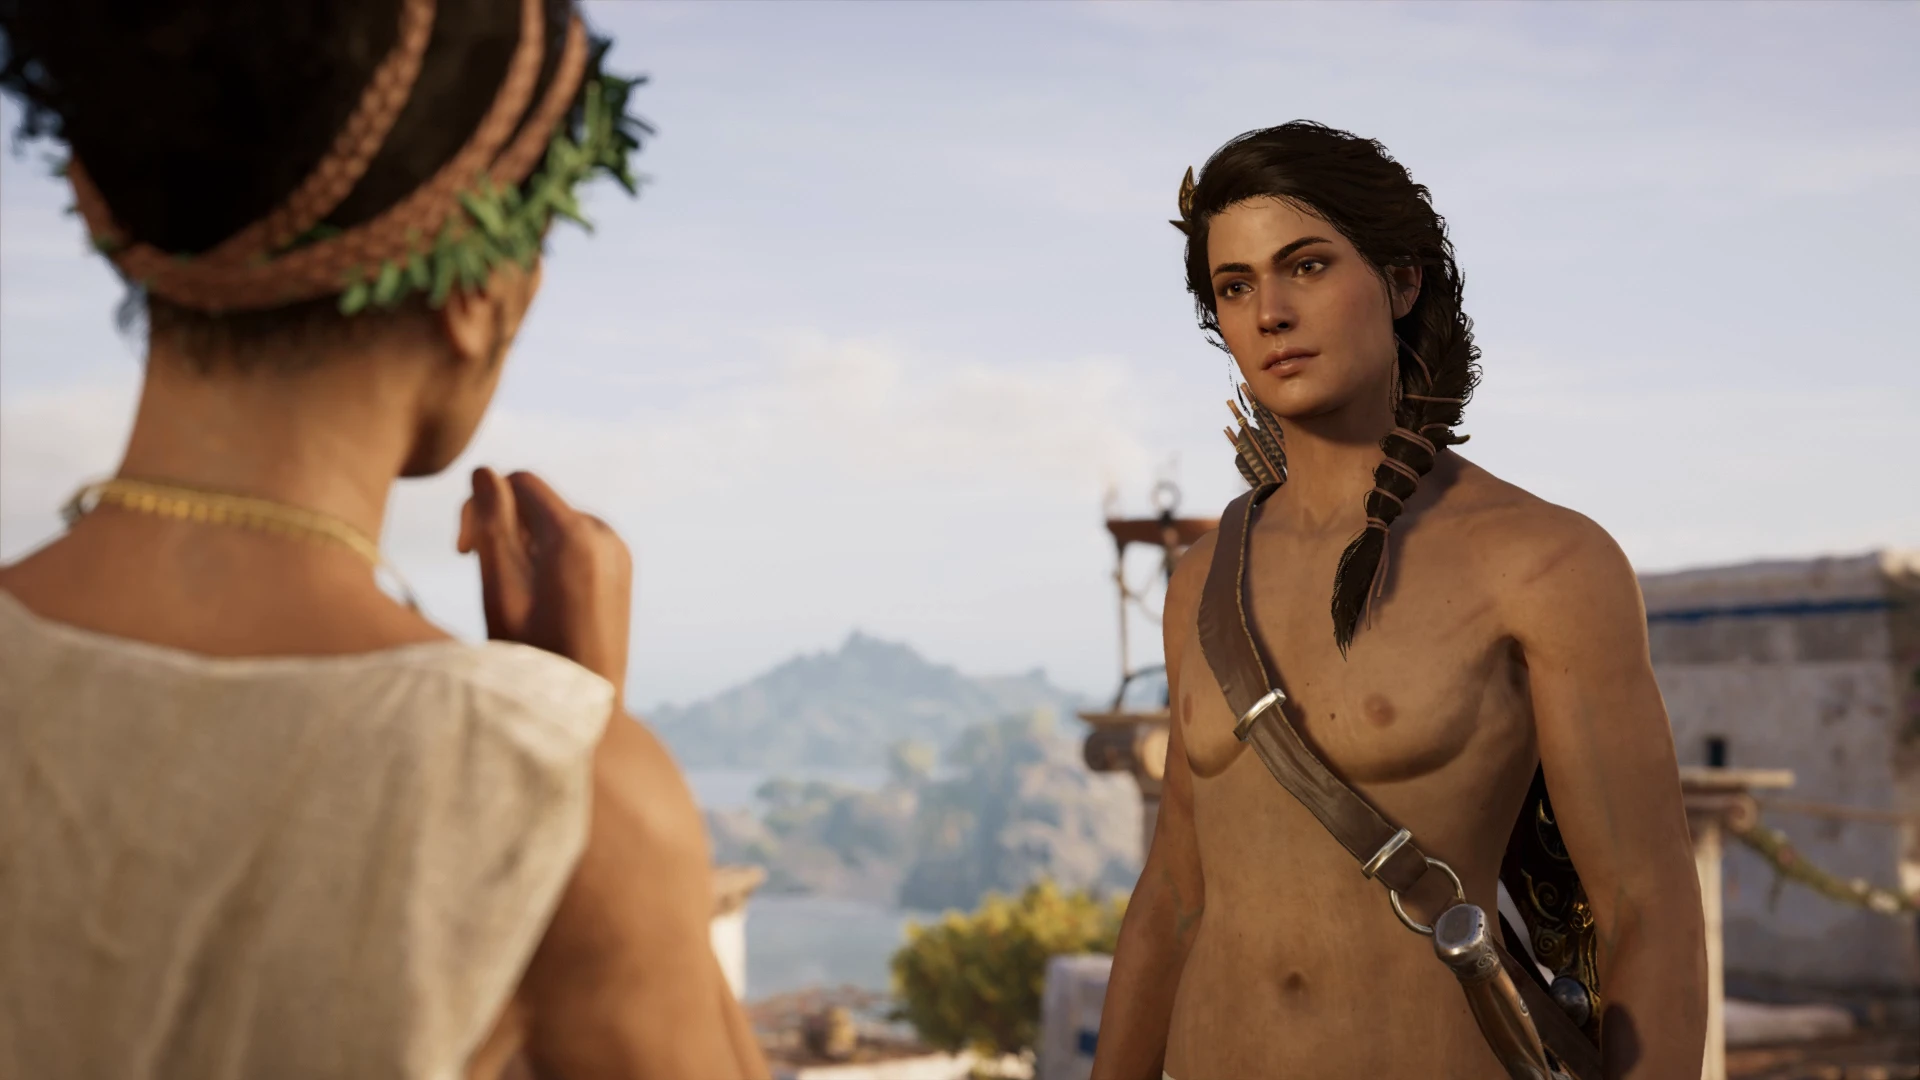 Assassin's creed odyssey nude mode